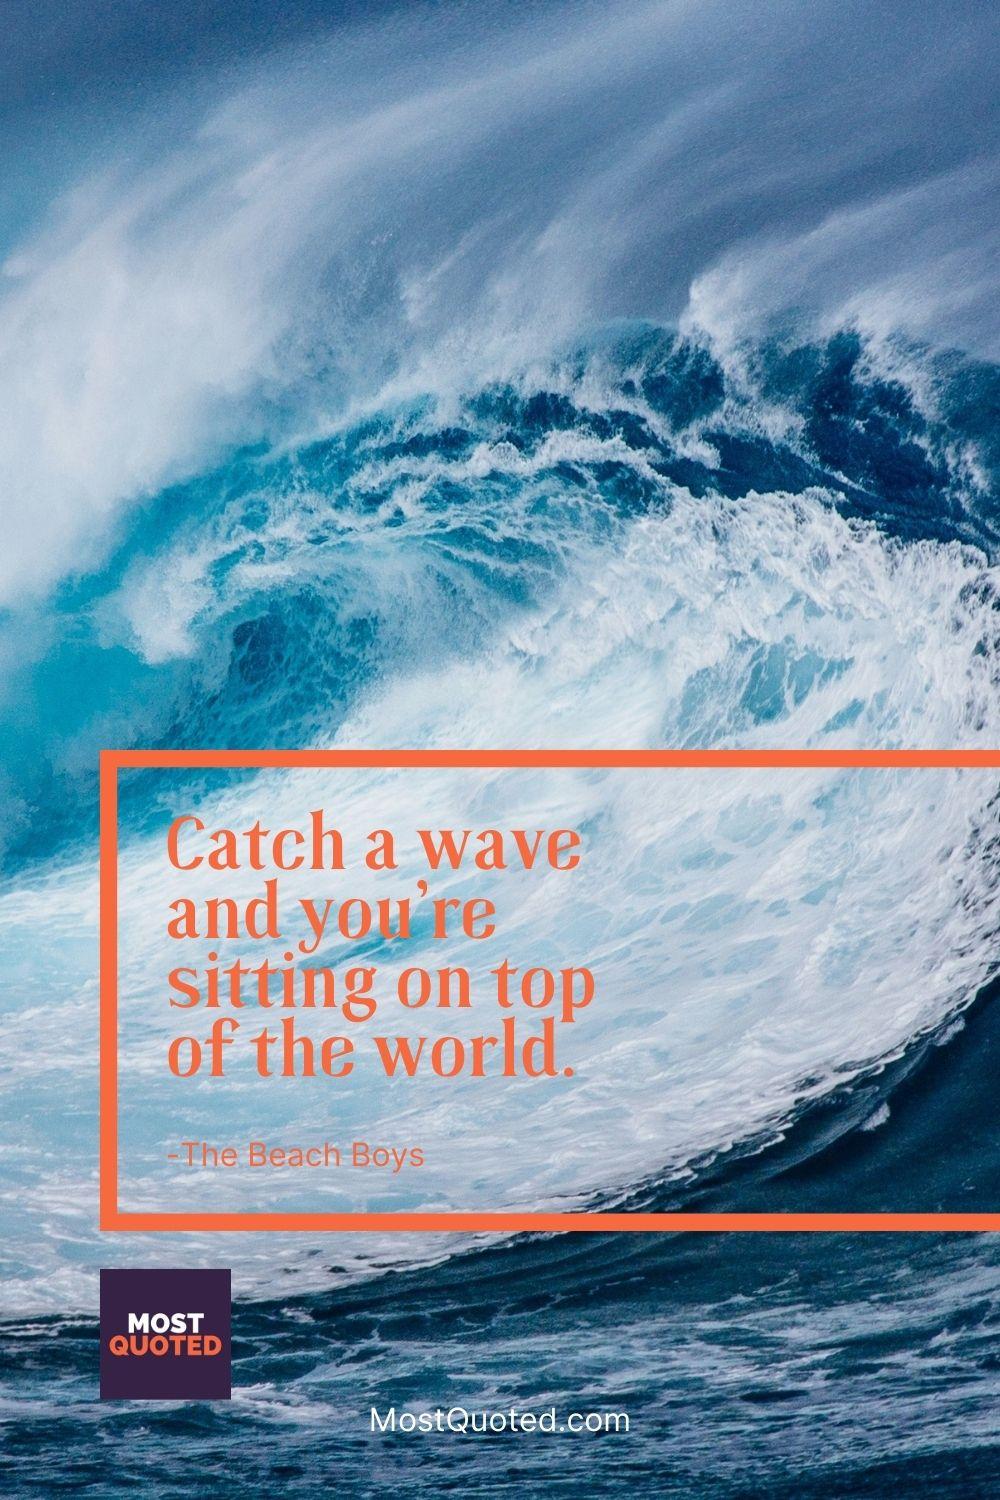 Catch a wave and you’re sitting on top of the world. - The Beach Boys